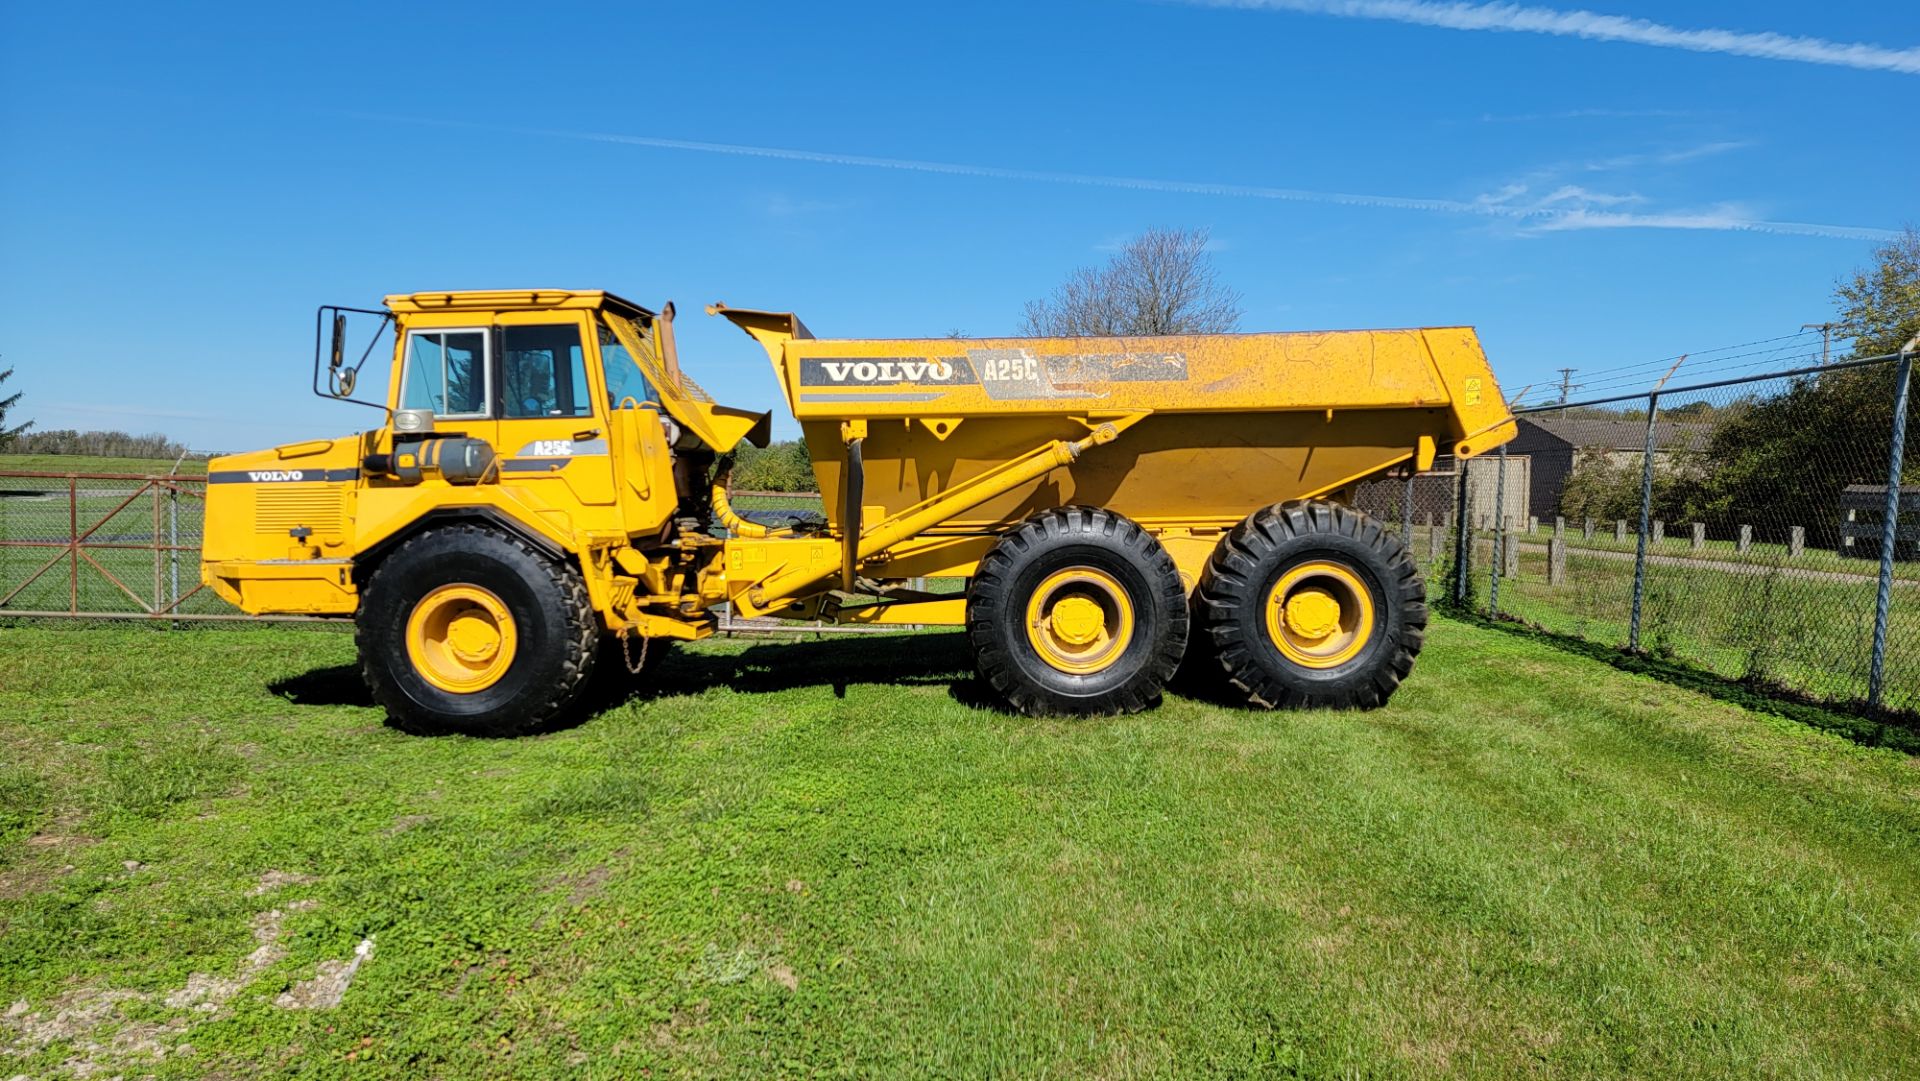 Volvo A25C 6x6 Offroad Dump Truck, 30,519 Miles, 12,411 Hours, s/n 5350V61011 - Image 7 of 34